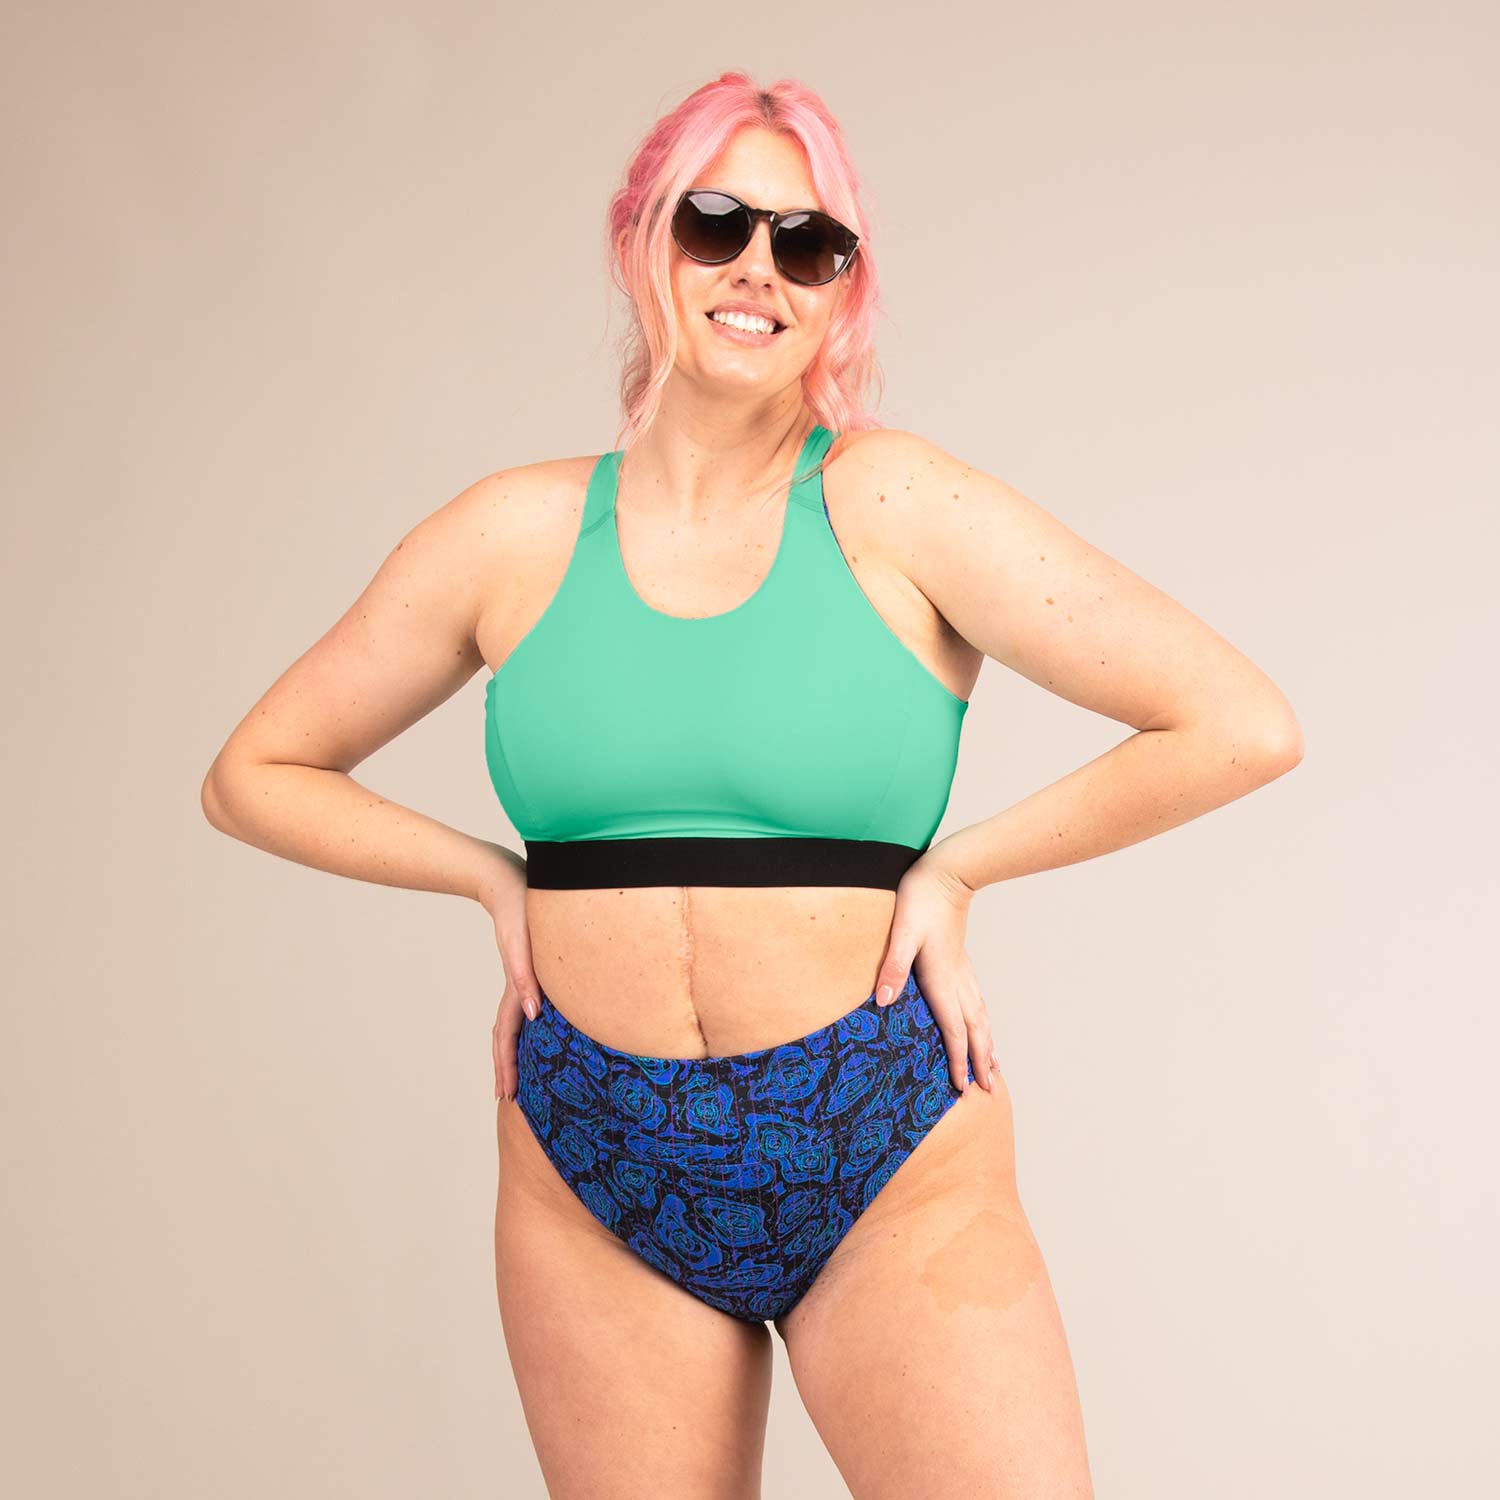 TIDE GEO JAGUAR | High Cut Recycled Bikini Bottoms | 3RD ROCK Clothing -  Sophie is 5ft 9 with a 34" waist, 42" hips and wears a size 16 F